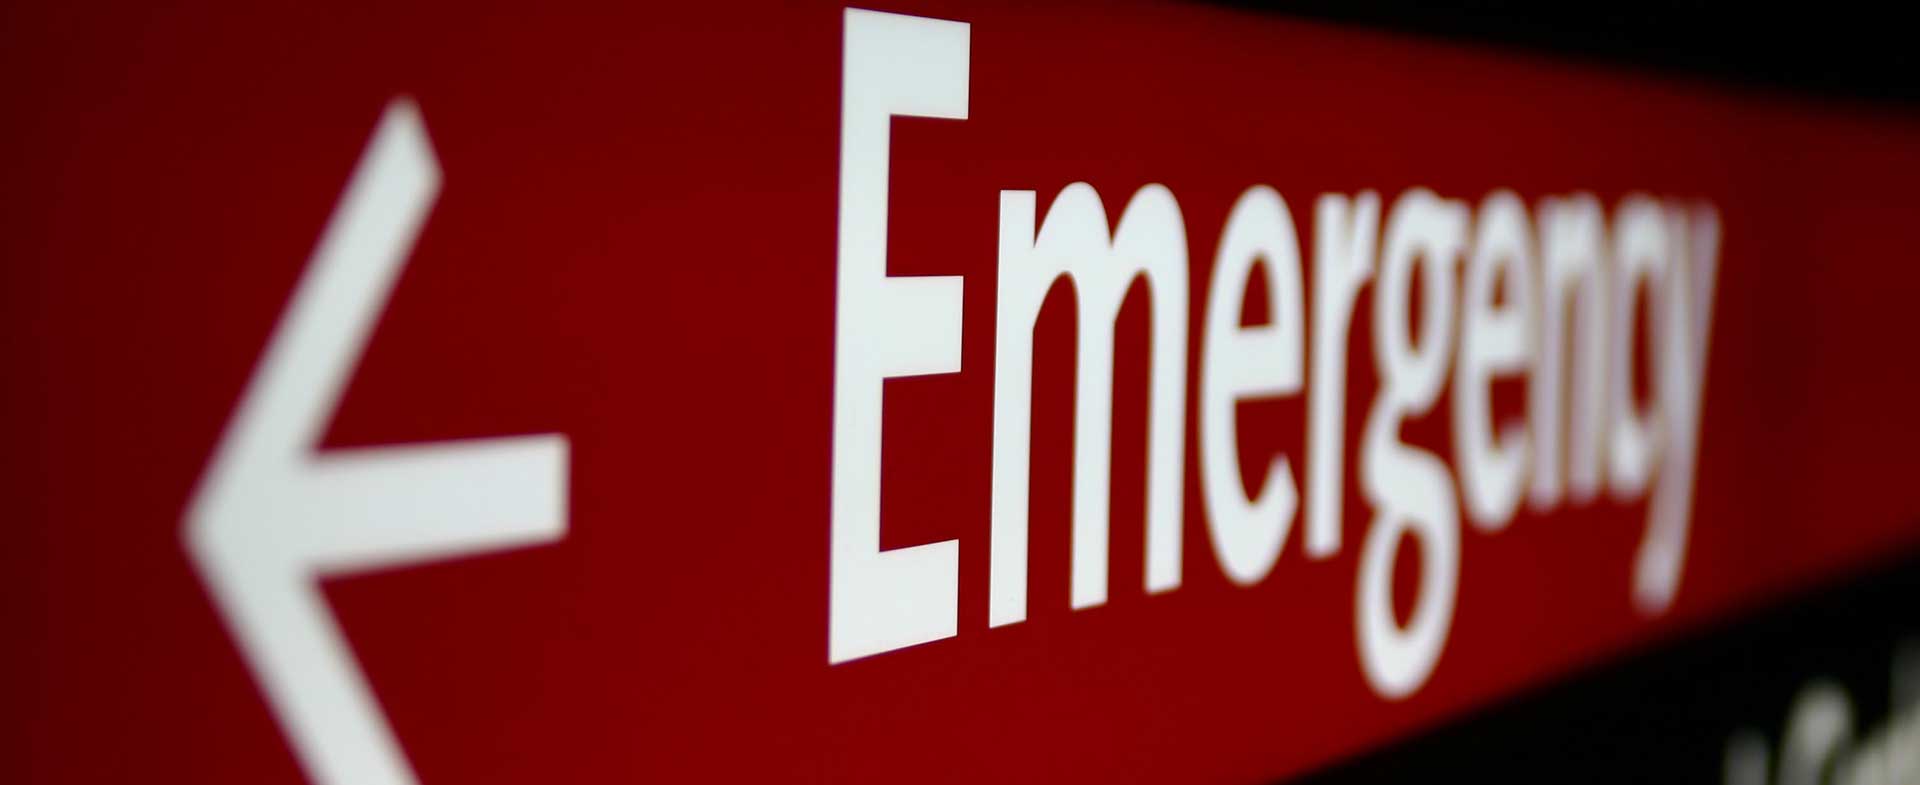 Should I Go To The Emergency Room Or Urgent Care?